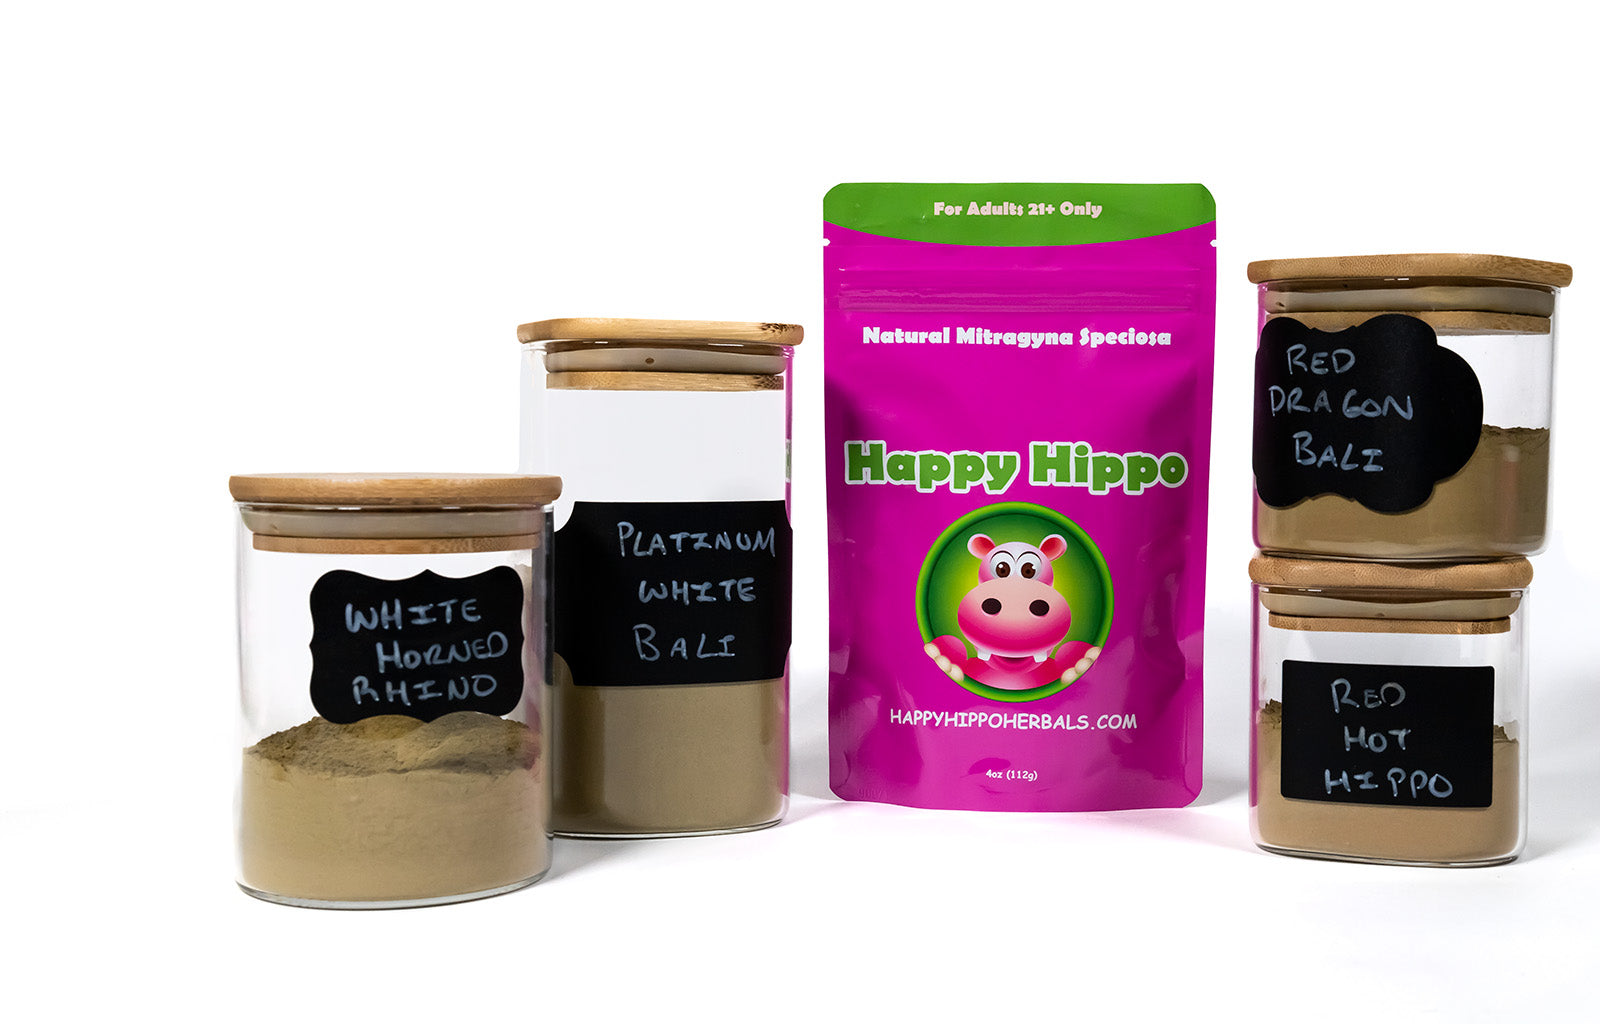 Featured image depicting an array of Happy Hippo Brand kratom powder, in glass jars. Labels include: White Horned Rhino, White Bali, Red Bali, and Red Maeng Da kratom powder. Among the glass jars is a single 4oz packet of Green Maeng Da kratom powder.